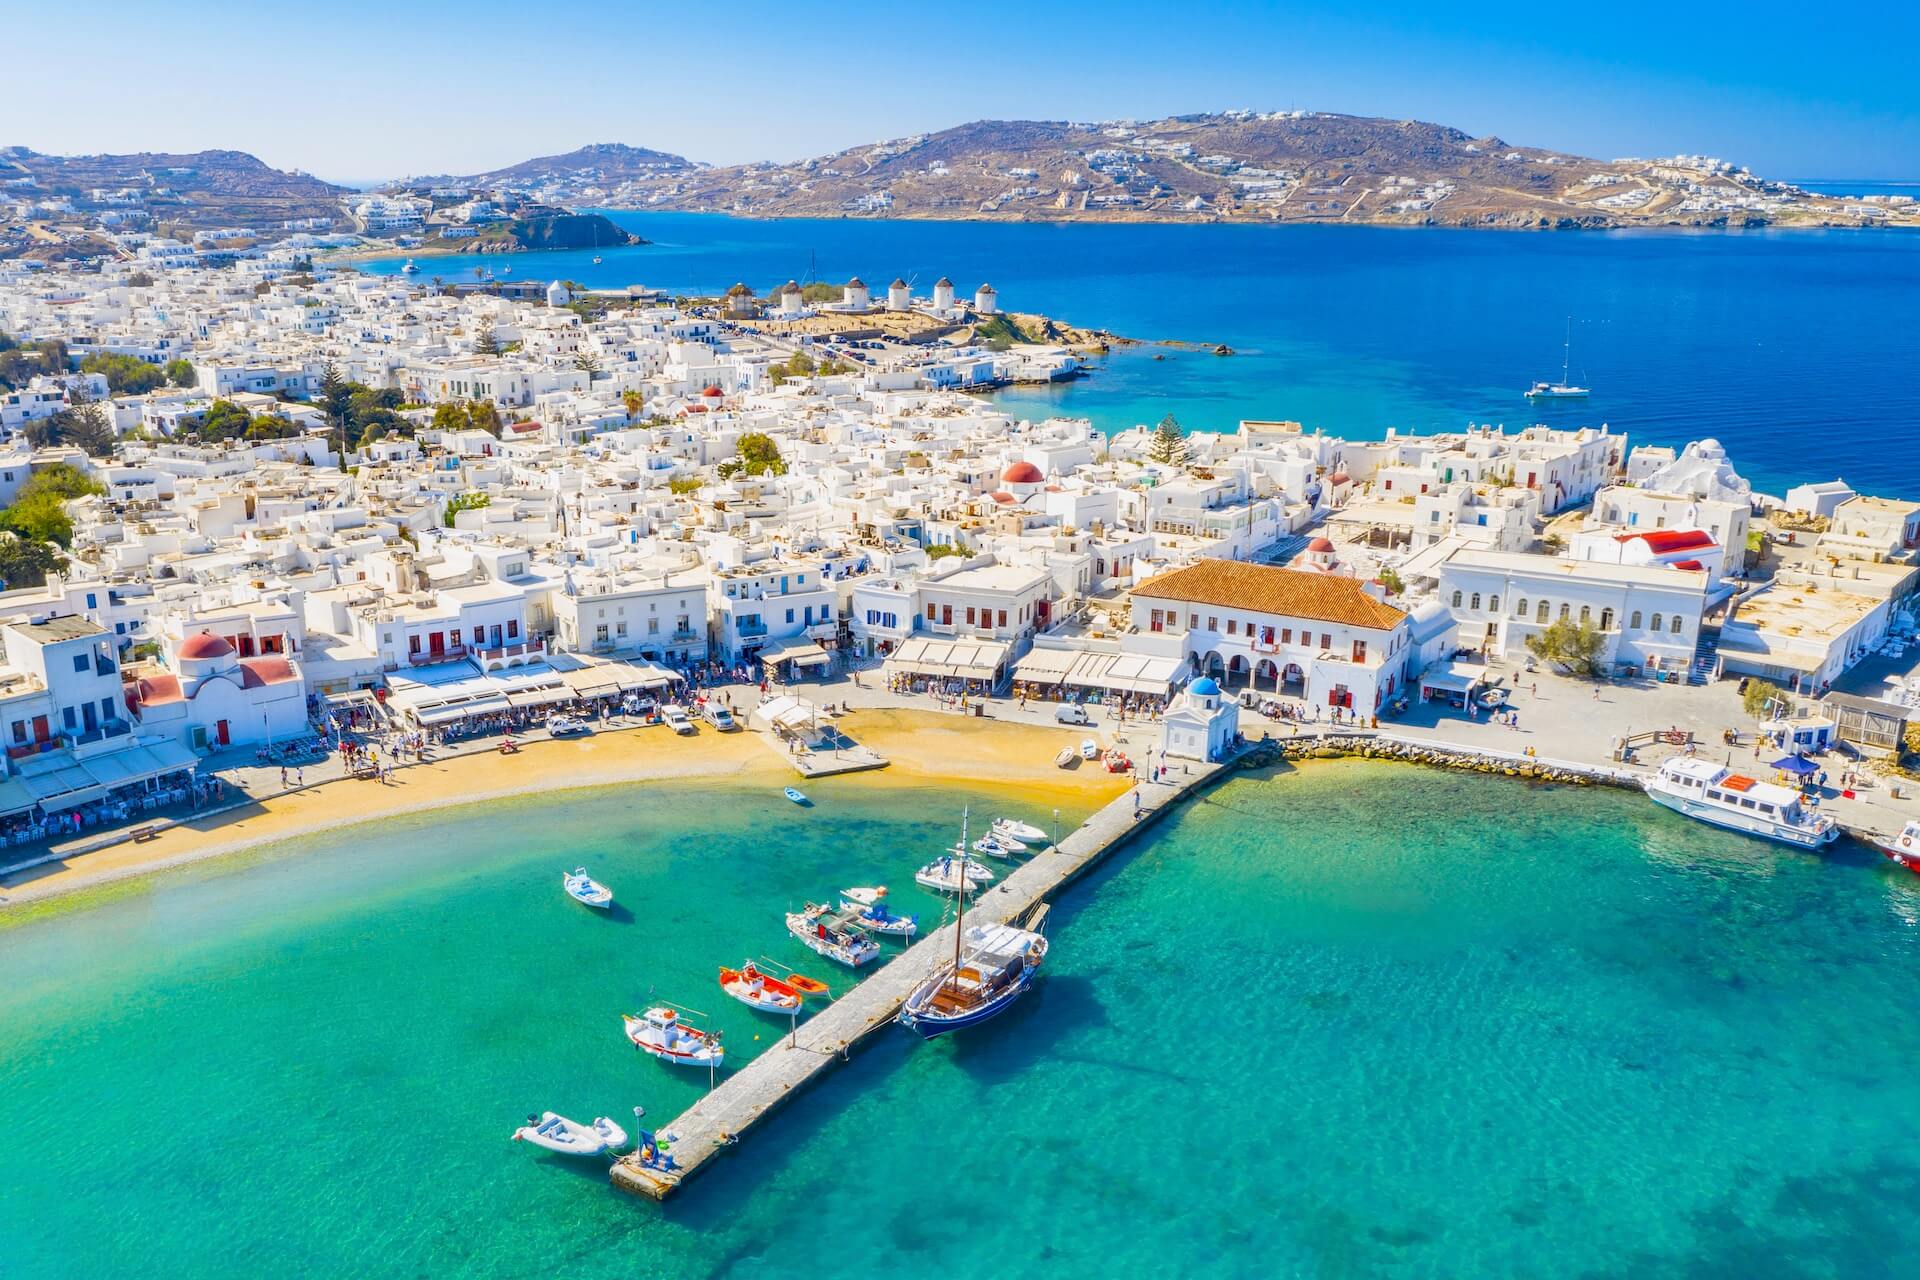 The view of the port in Mykonos 